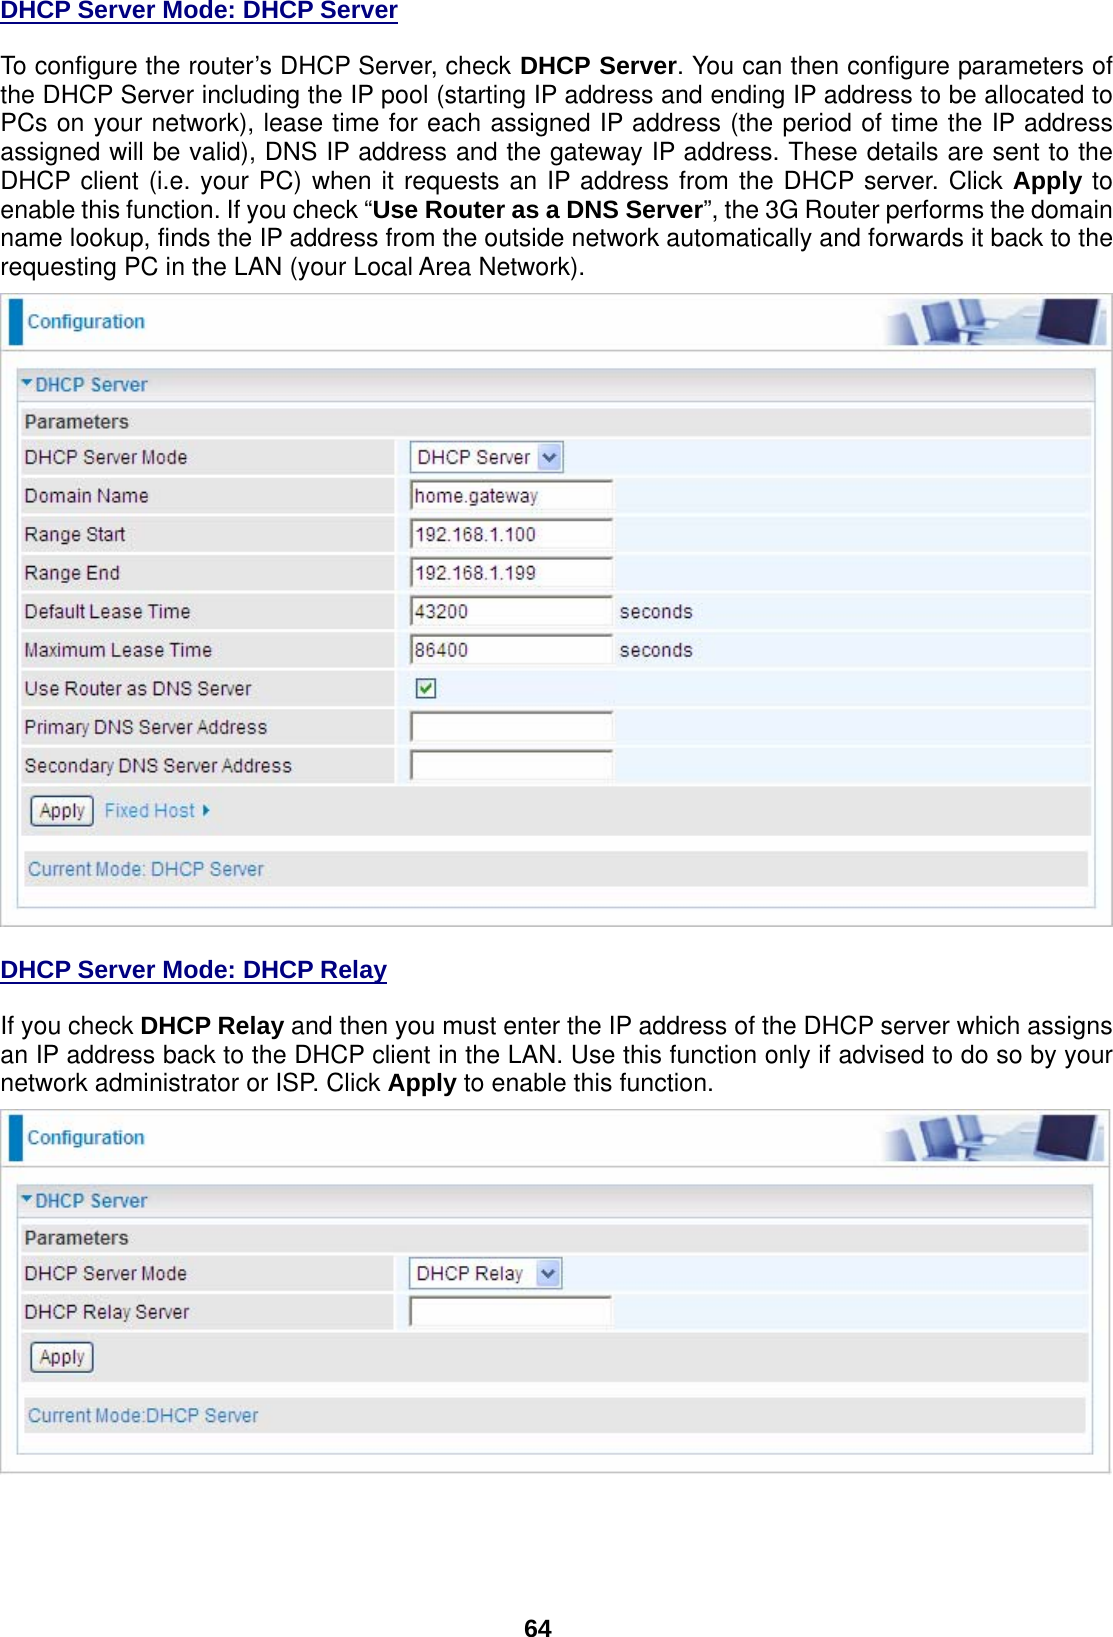  64 DHCP Server Mode: DHCP Server To configure the router’s DHCP Server, check DHCP Server. You can then configure parameters of the DHCP Server including the IP pool (starting IP address and ending IP address to be allocated to PCs on your network), lease time for each assigned IP address (the period of time the IP address assigned will be valid), DNS IP address and the gateway IP address. These details are sent to the DHCP client (i.e. your PC) when it requests an IP address from the DHCP server. Click Apply to enable this function. If you check “Use Router as a DNS Server”, the 3G Router performs the domain name lookup, finds the IP address from the outside network automatically and forwards it back to the requesting PC in the LAN (your Local Area Network).   DHCP Server Mode: DHCP Relay If you check DHCP Relay and then you must enter the IP address of the DHCP server which assigns an IP address back to the DHCP client in the LAN. Use this function only if advised to do so by your network administrator or ISP. Click Apply to enable this function. 